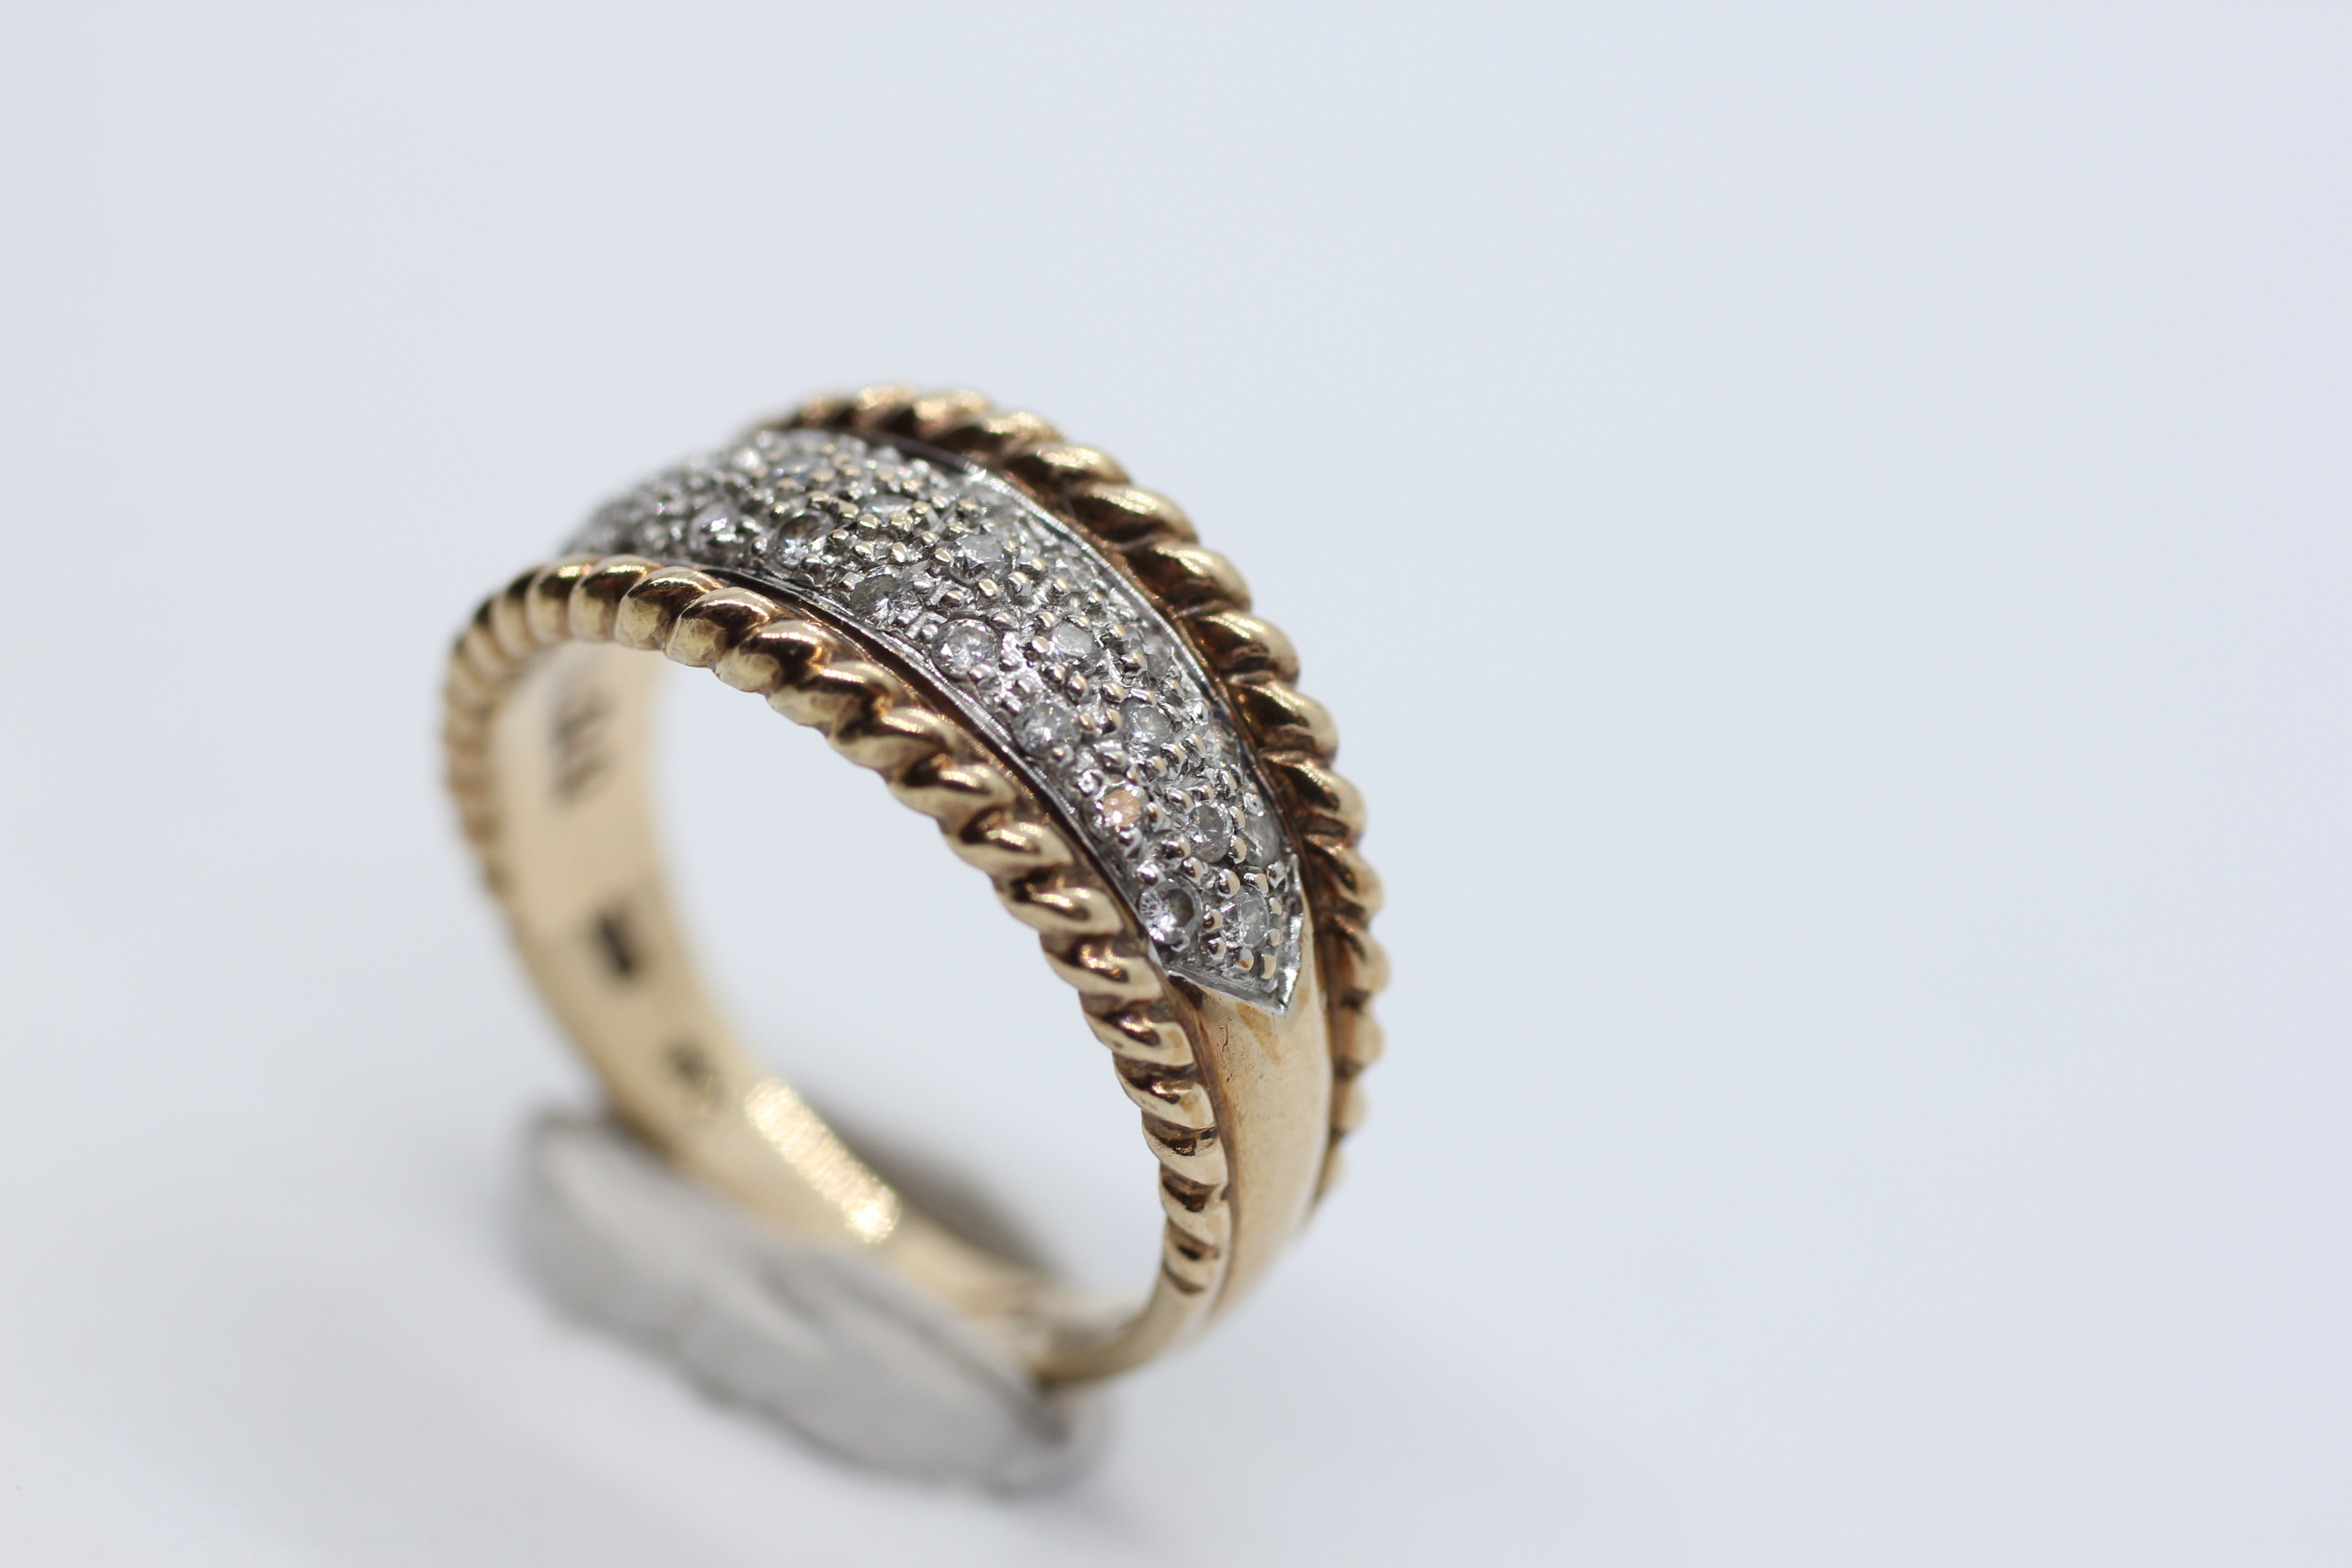 A DESIGNER 9CT GOLD RING SET WITH MULTIPLE DIAMONDS WITHIN A ROPE TRIM. - Image 6 of 13